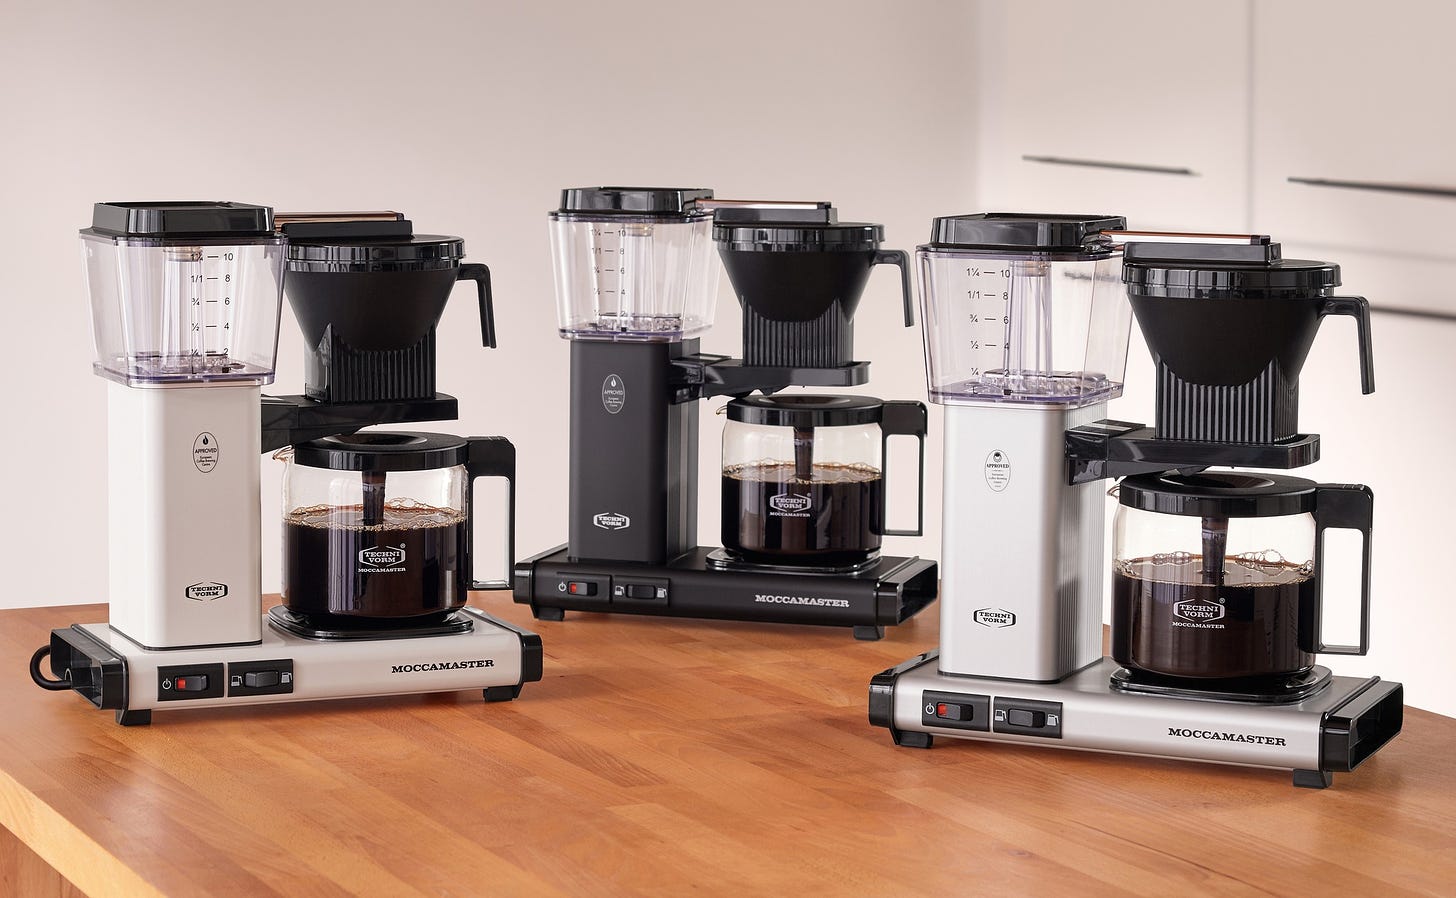 Three automatic coffee brewers lined up on a wood tabletop.